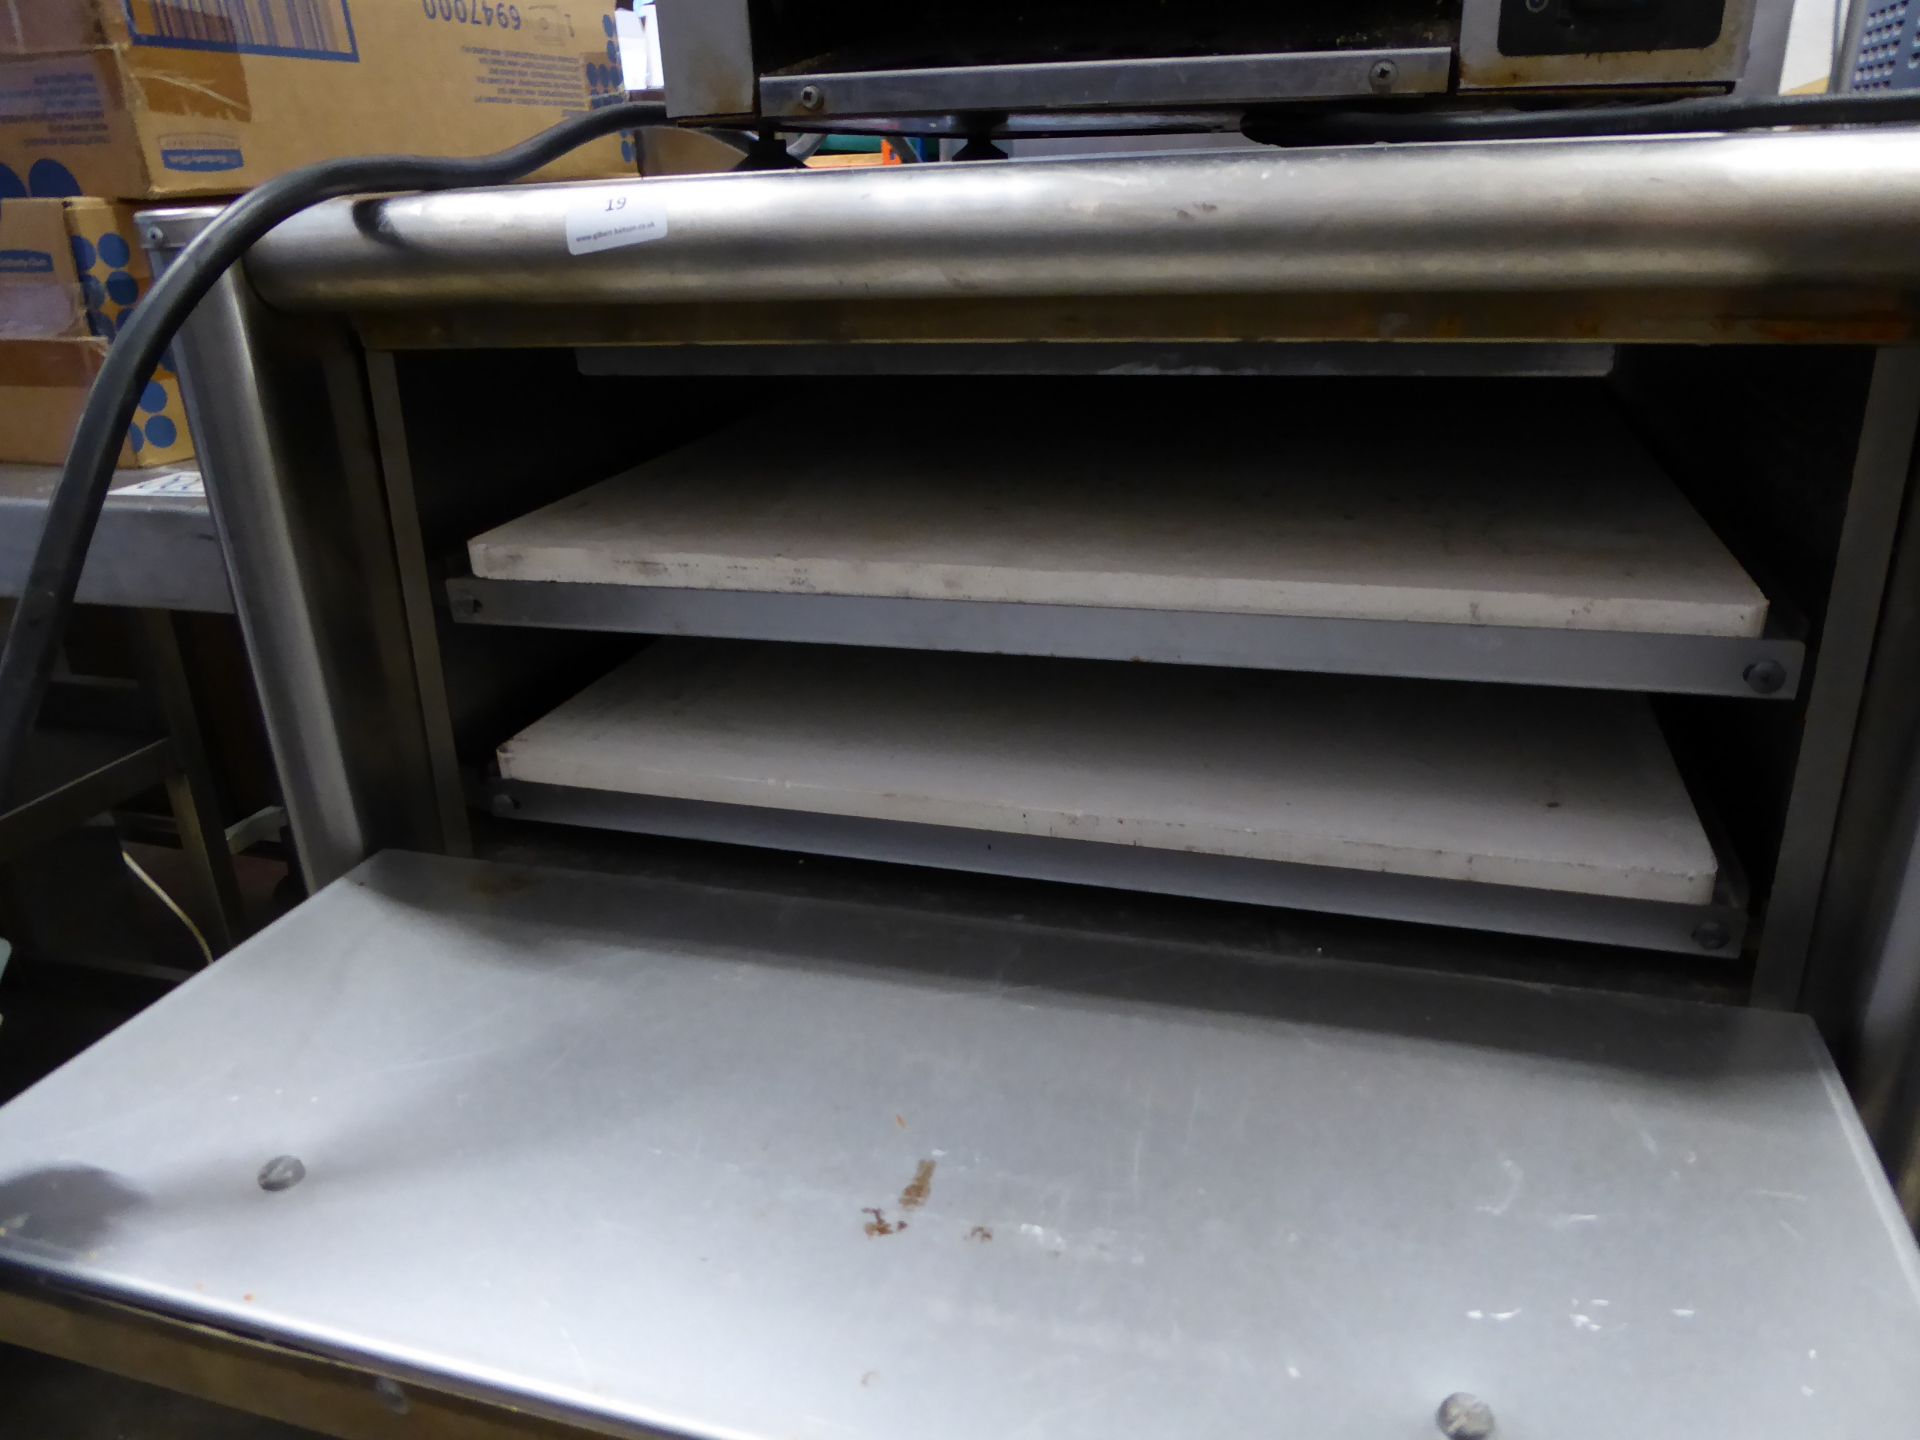 * grindmaster Cecilware 2 shelf pizza oven size 520 x 520 single phase electric - Image 2 of 3